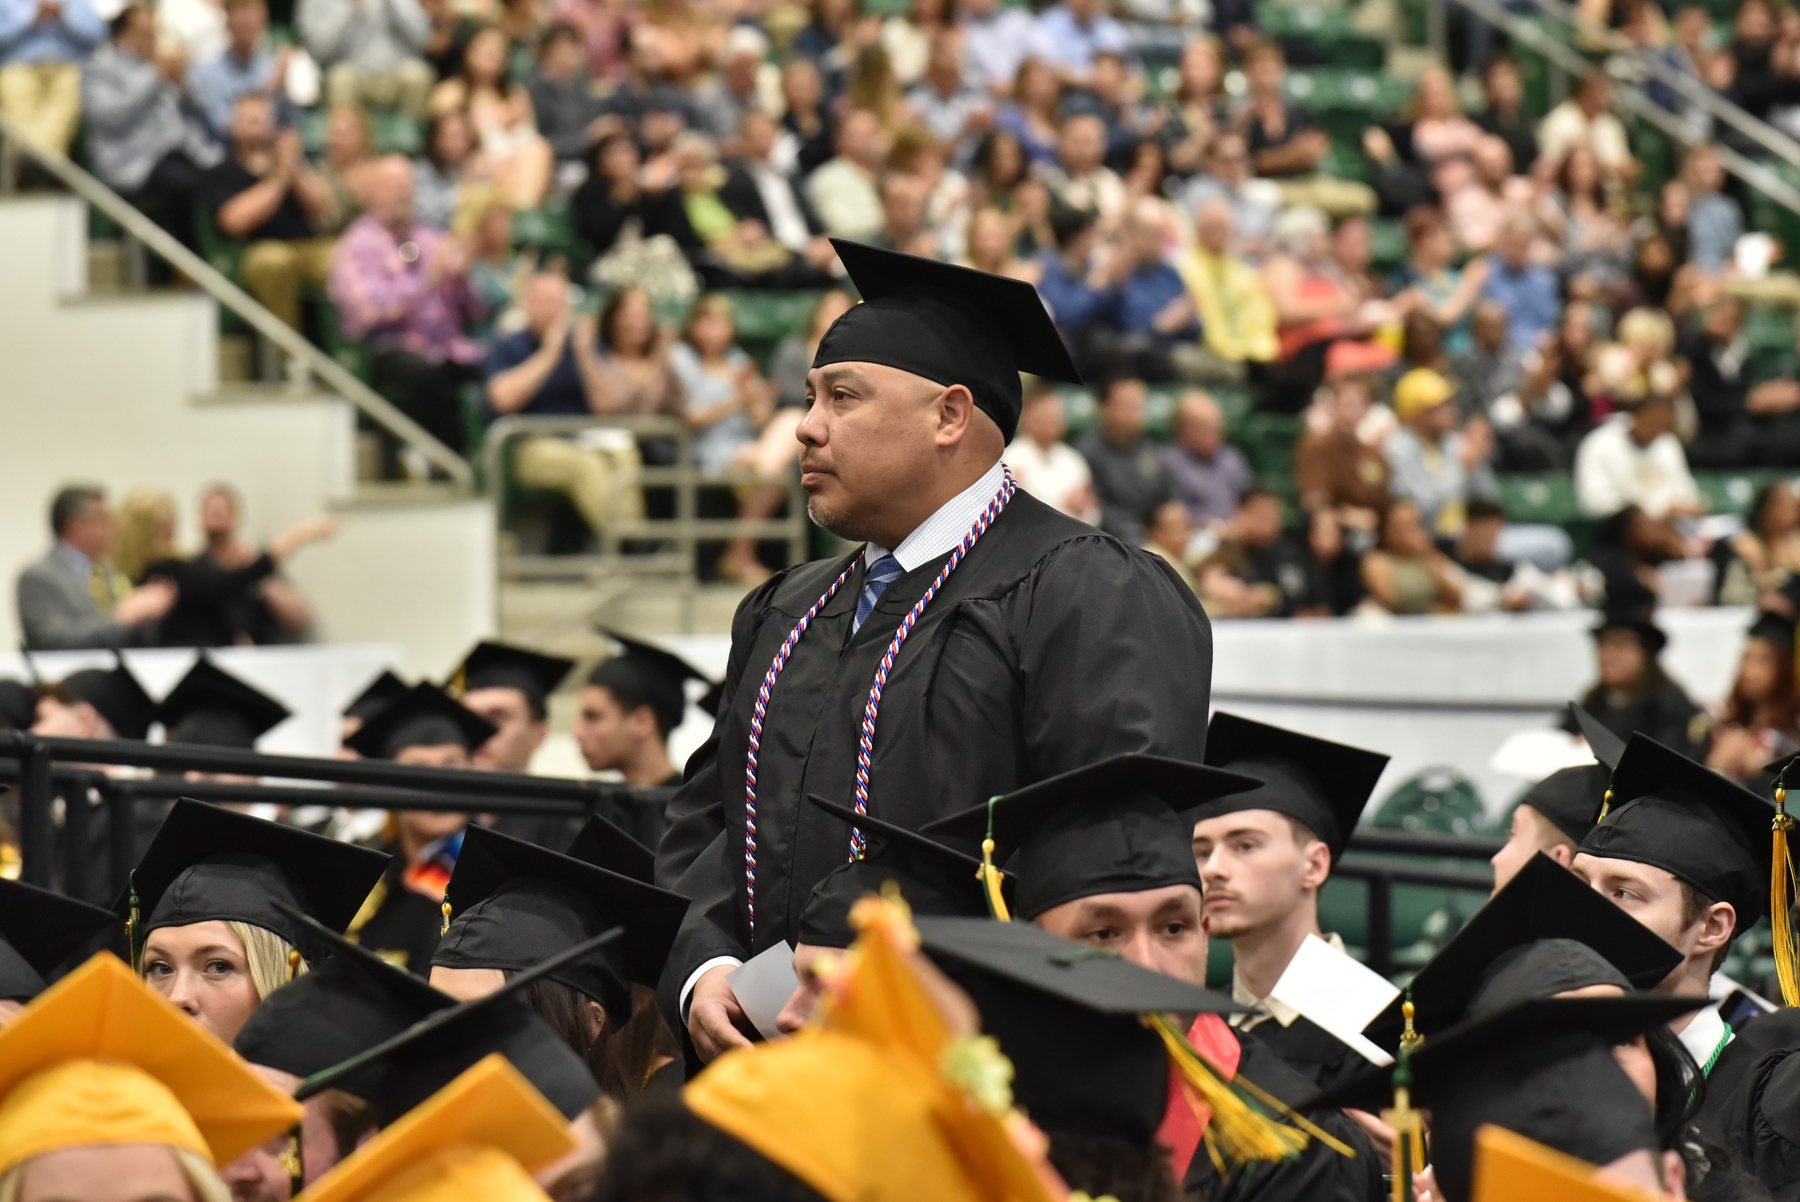 Military service members and veterans are recognized by Provost Scott Furlong at the beginning of each Commencement ceremony. Pictured is Jerry Mosqueda, a graduate in the School of Business, as he stands in recognition of his valued service.